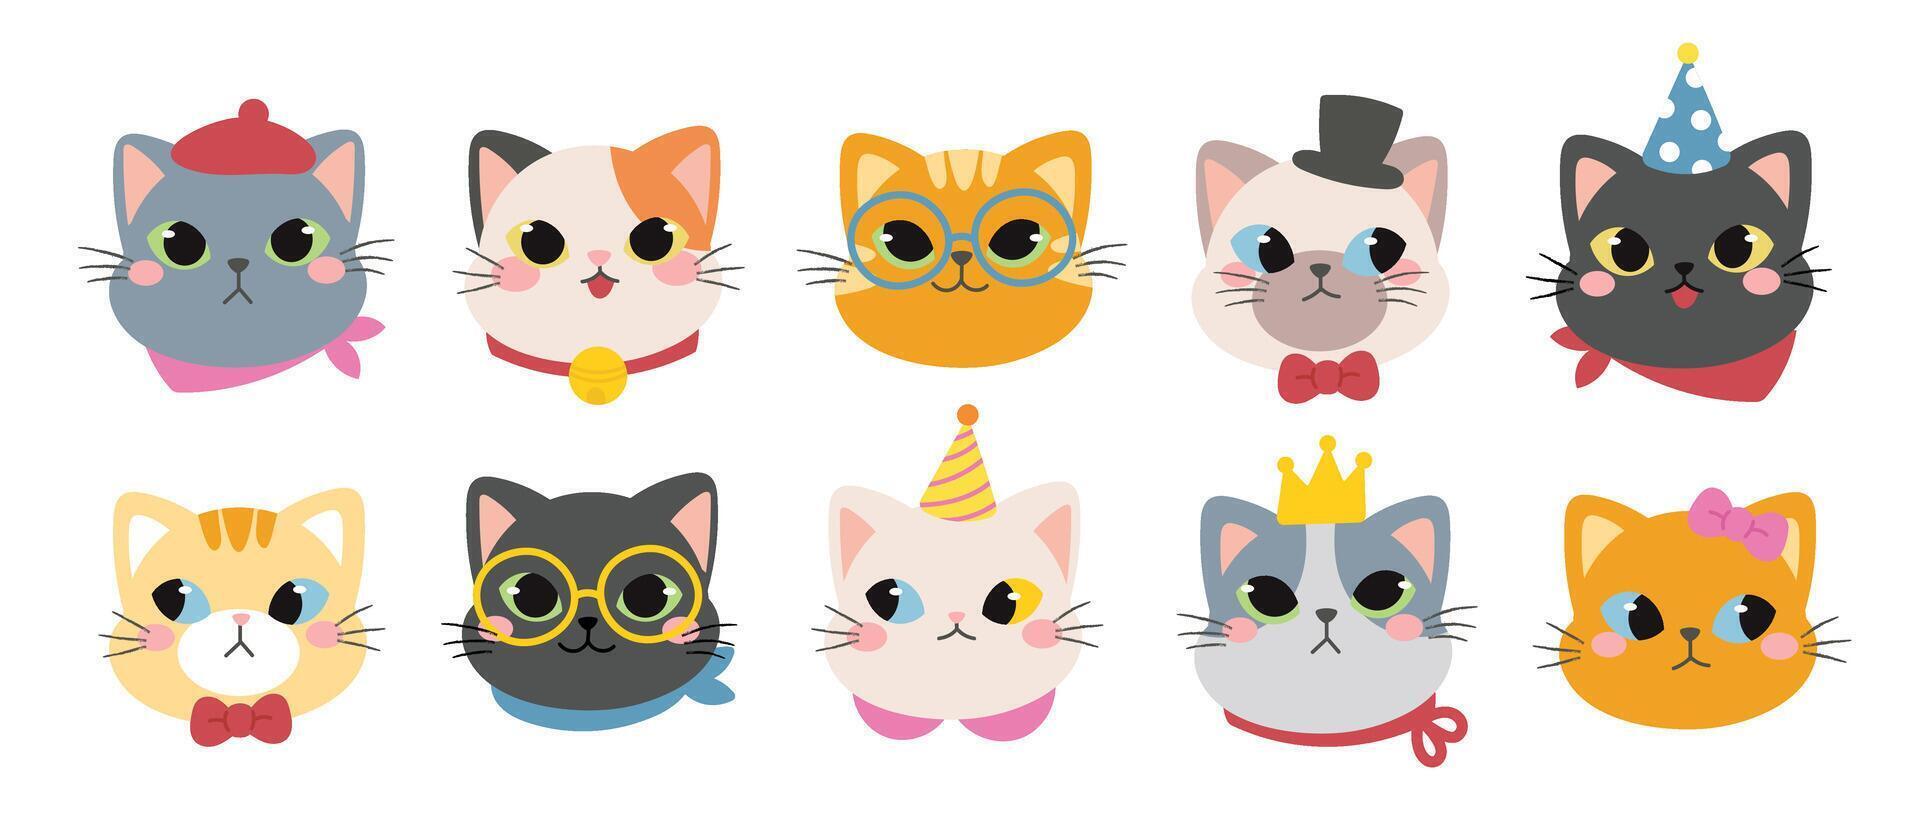 Cute and smile cat heads doodle set. Comic happy cat faces character design of different cat breed with flat color isolated on white background. Design illustration for sticker, comic, clipart. vector